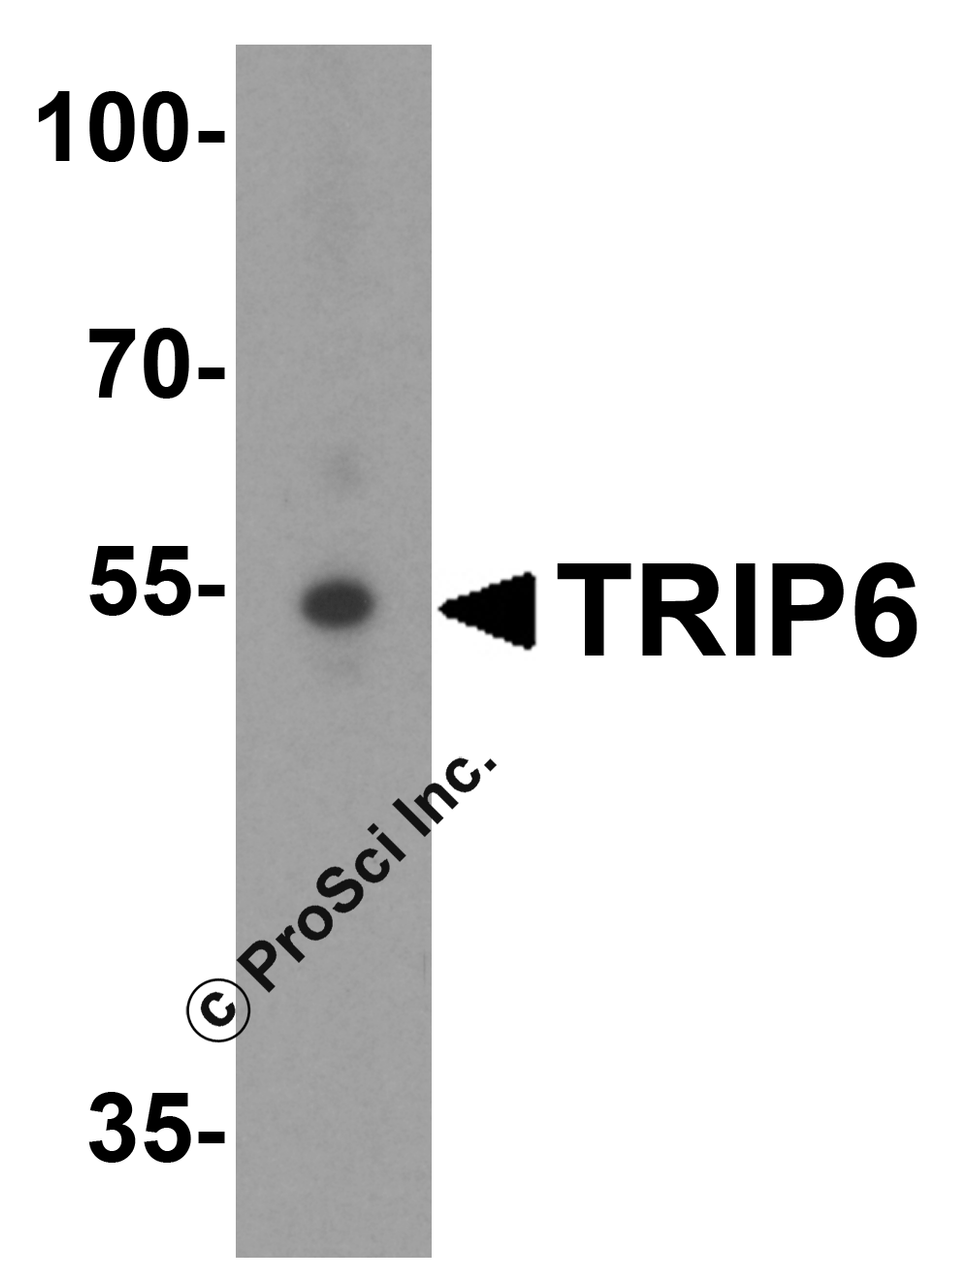 Western blot analysis of TRIP6 in A431 cell lysate with TRIP6 antibody at 1 &#956;g/mL.